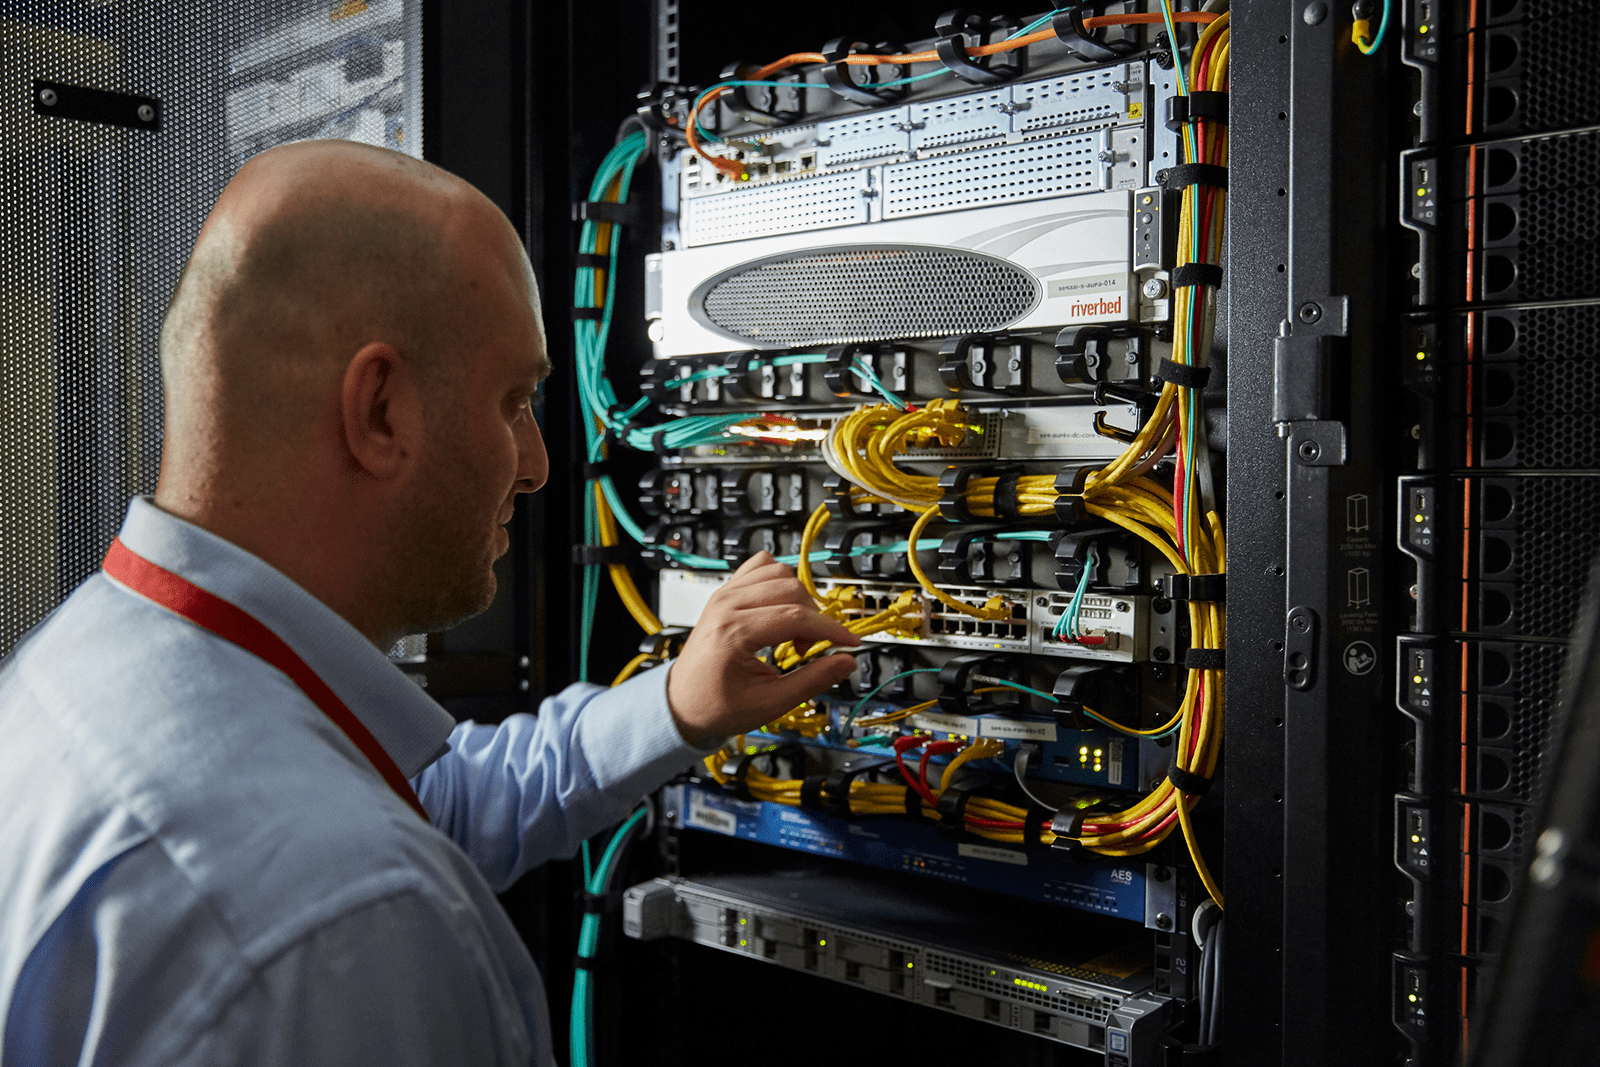 Man looking at a network server